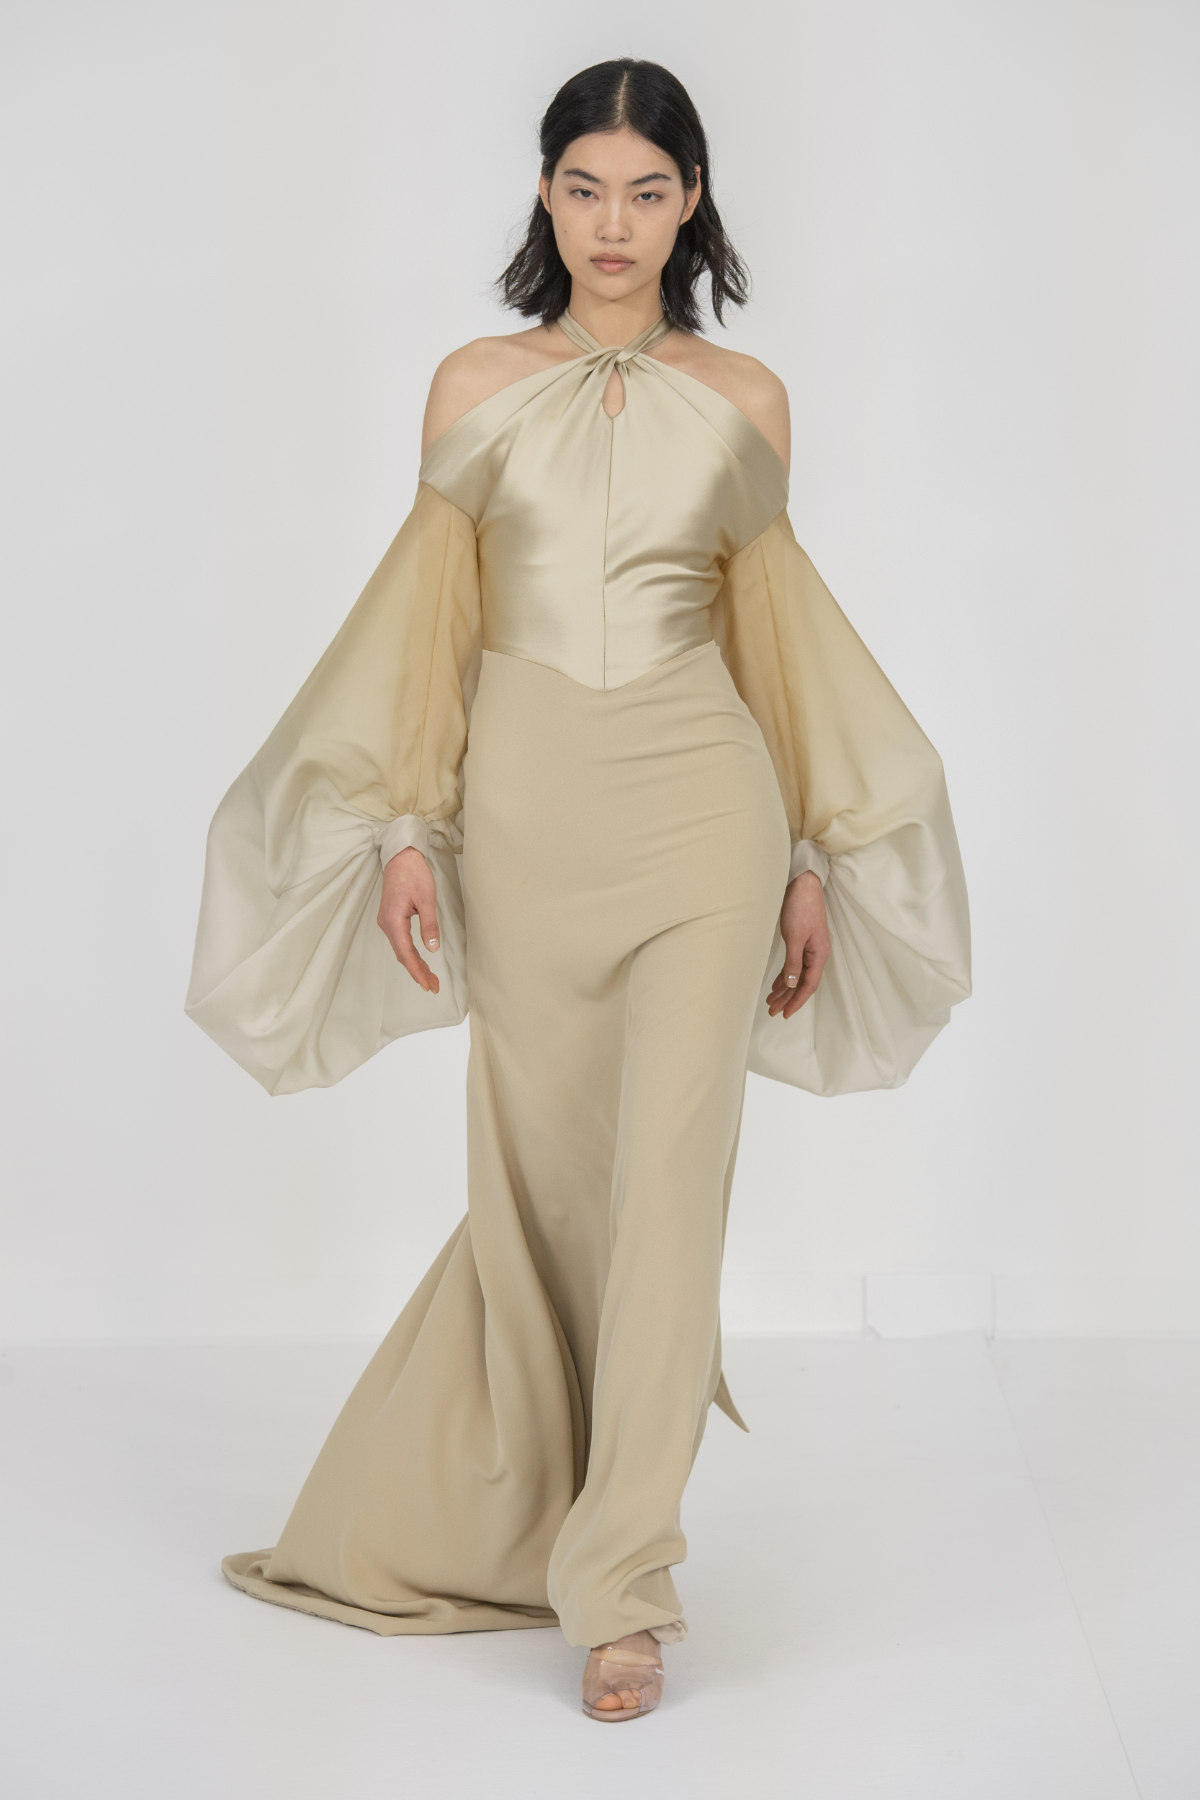 Alexis Mabille Presents His New Haute Couture Spring-Summer 2024 Collection: Mirror, Mirror